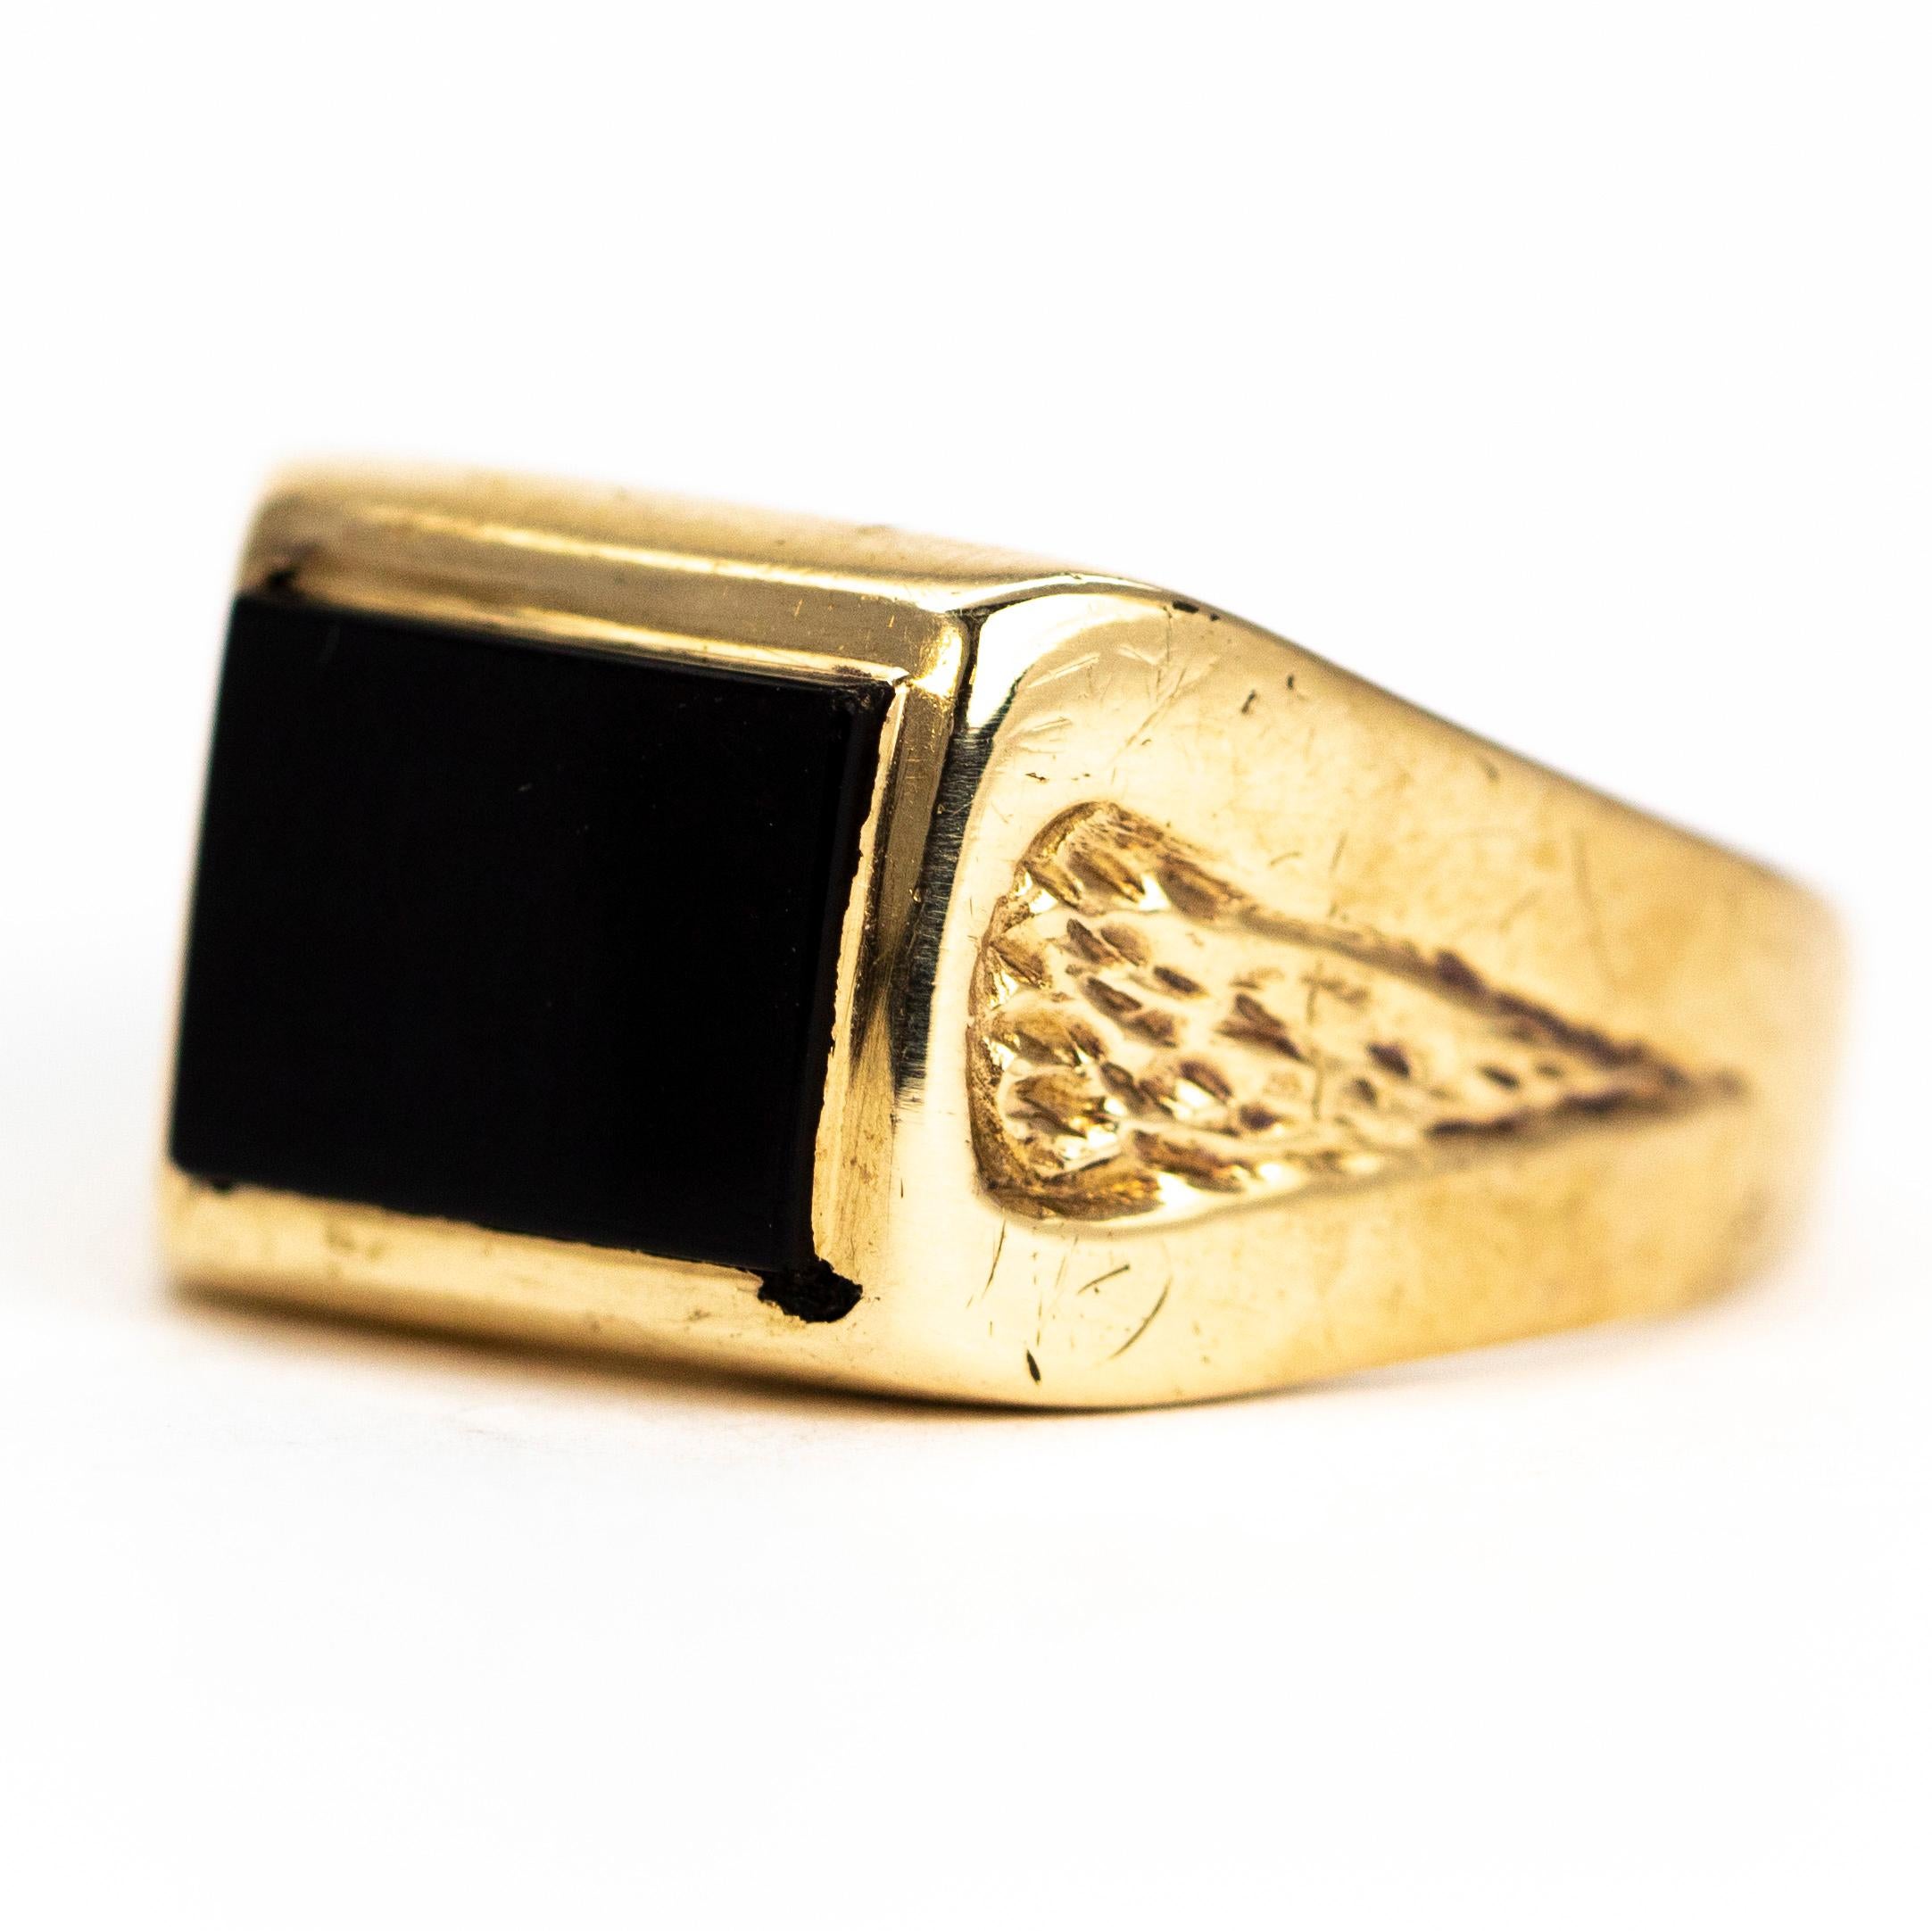 Either Side of the gorgeous glossy onyx is a panel of textured gold etched into the shoulders of this chunky ring. The onyx is crisply cut into a rectangle and set within the 9ct gold band. Made in London, England.

Ring Size: S 1/2 or 9 1/4
Stone